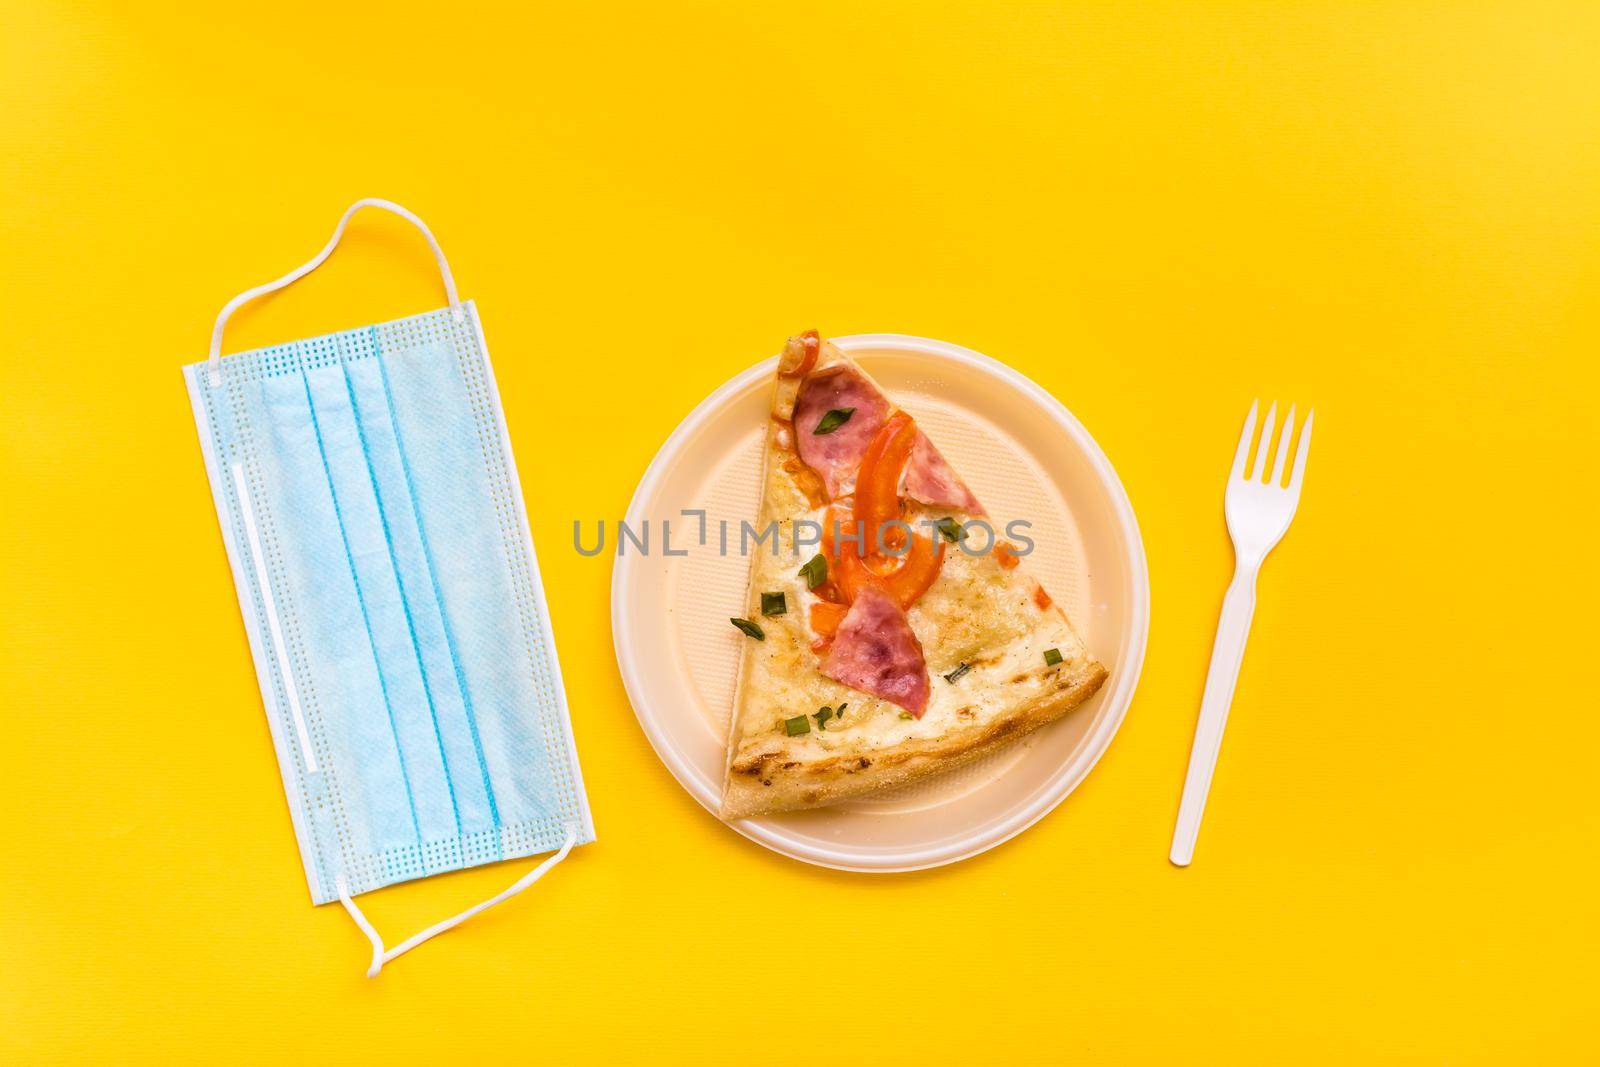 Takeaway and delivery. A slice of pizza in a disposable plastic plate, a protective mask and a fork on a yellow background by Aleruana